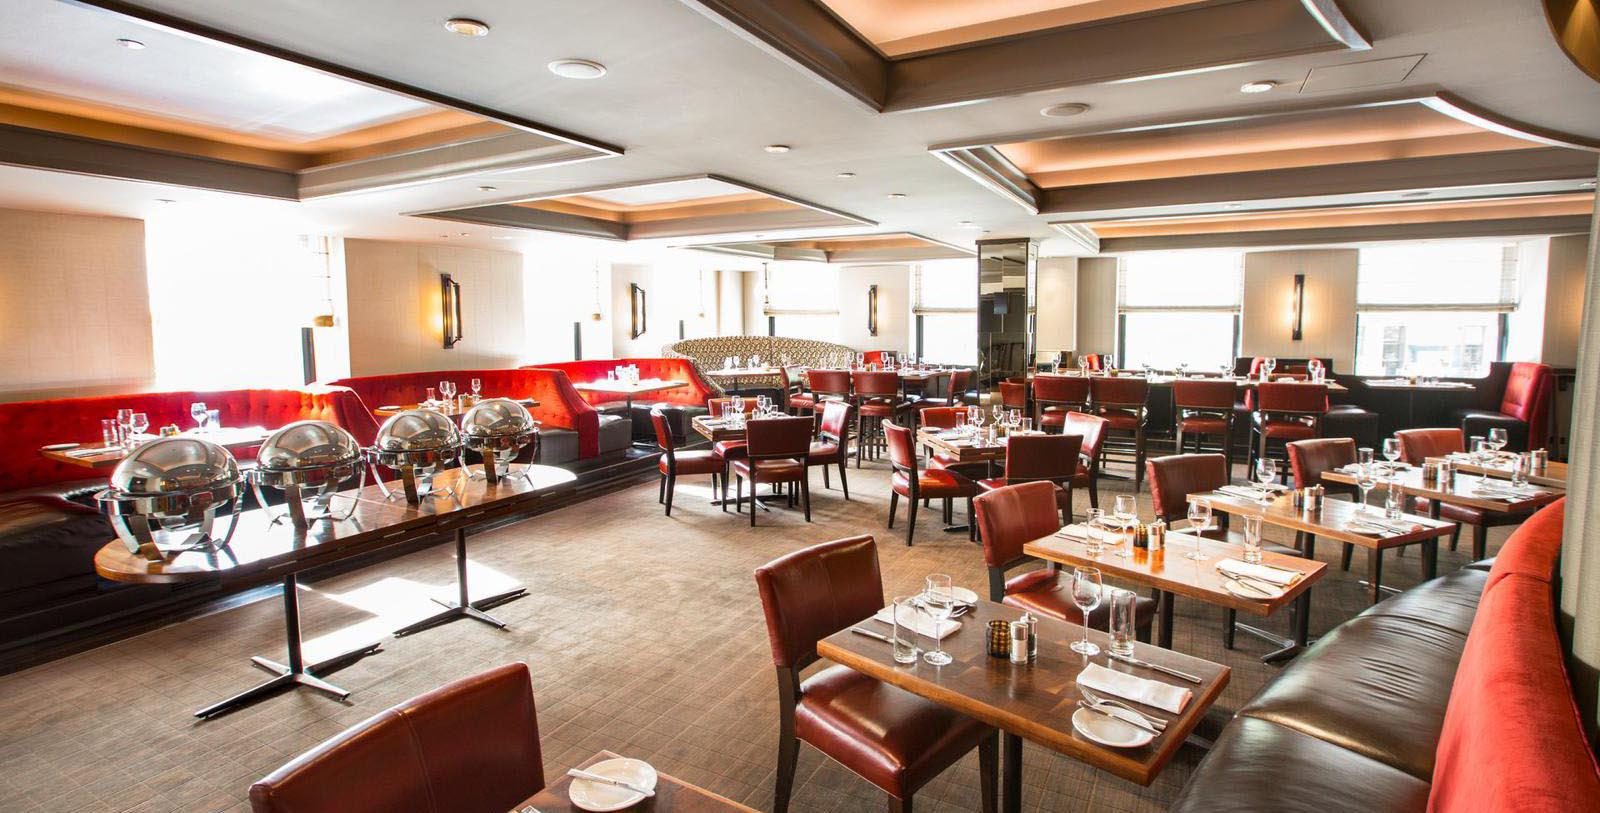 Taste classic steakhouse fare at Gene & Georgetti, Chicago’s oldest steakhouse.